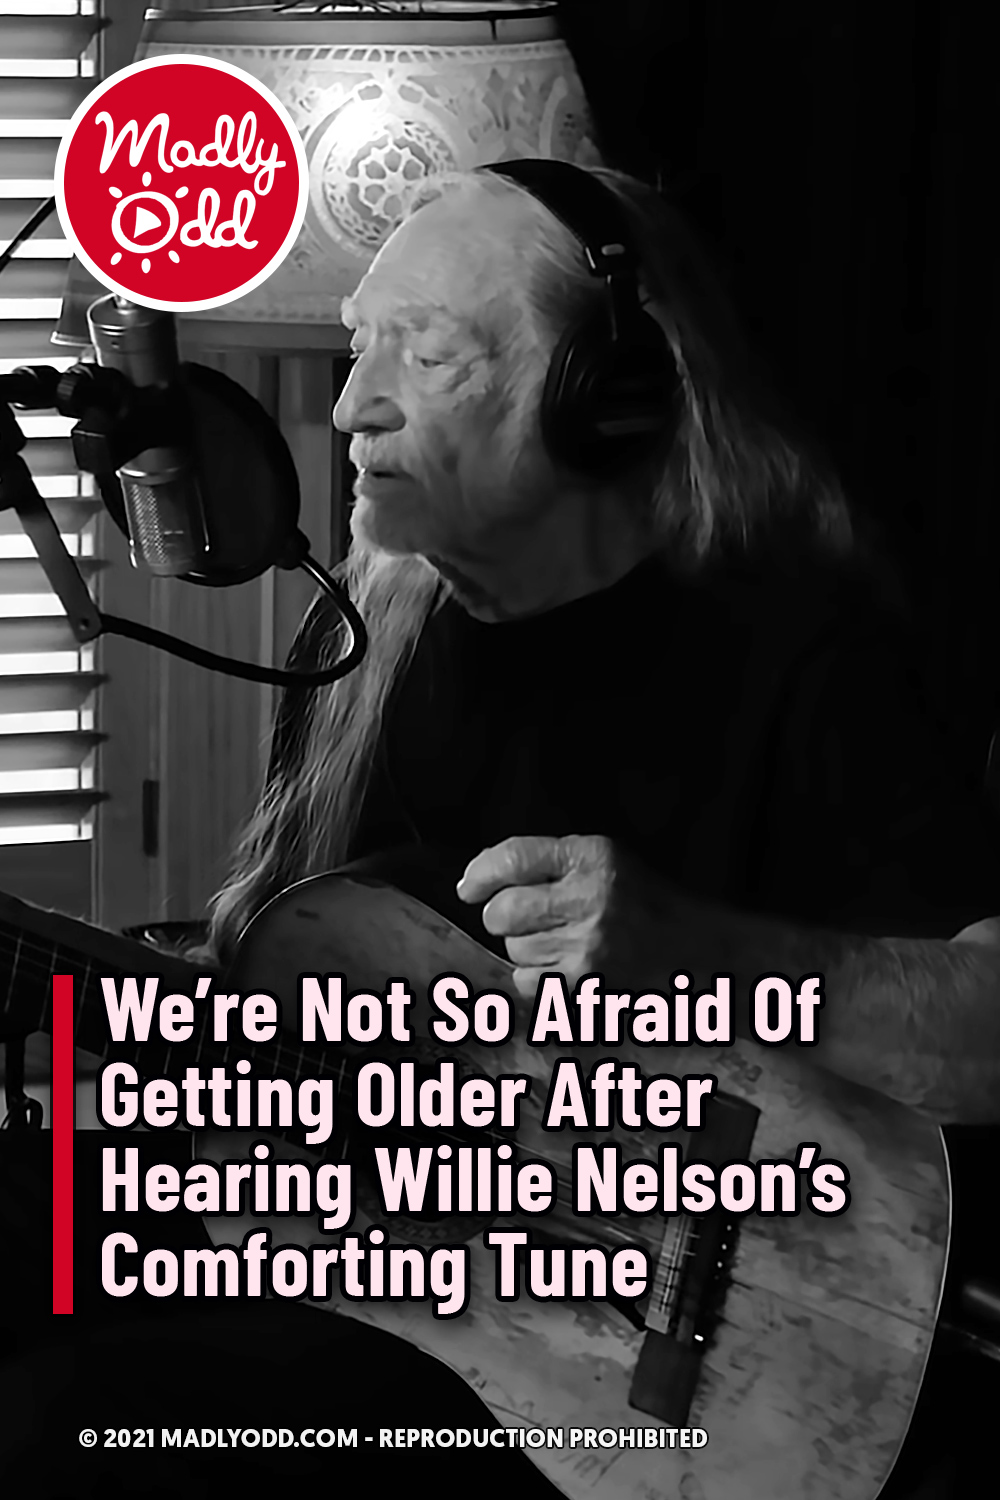 We’re Not So Afraid Of Getting Older After Hearing Willie Nelson’s Comforting Tune